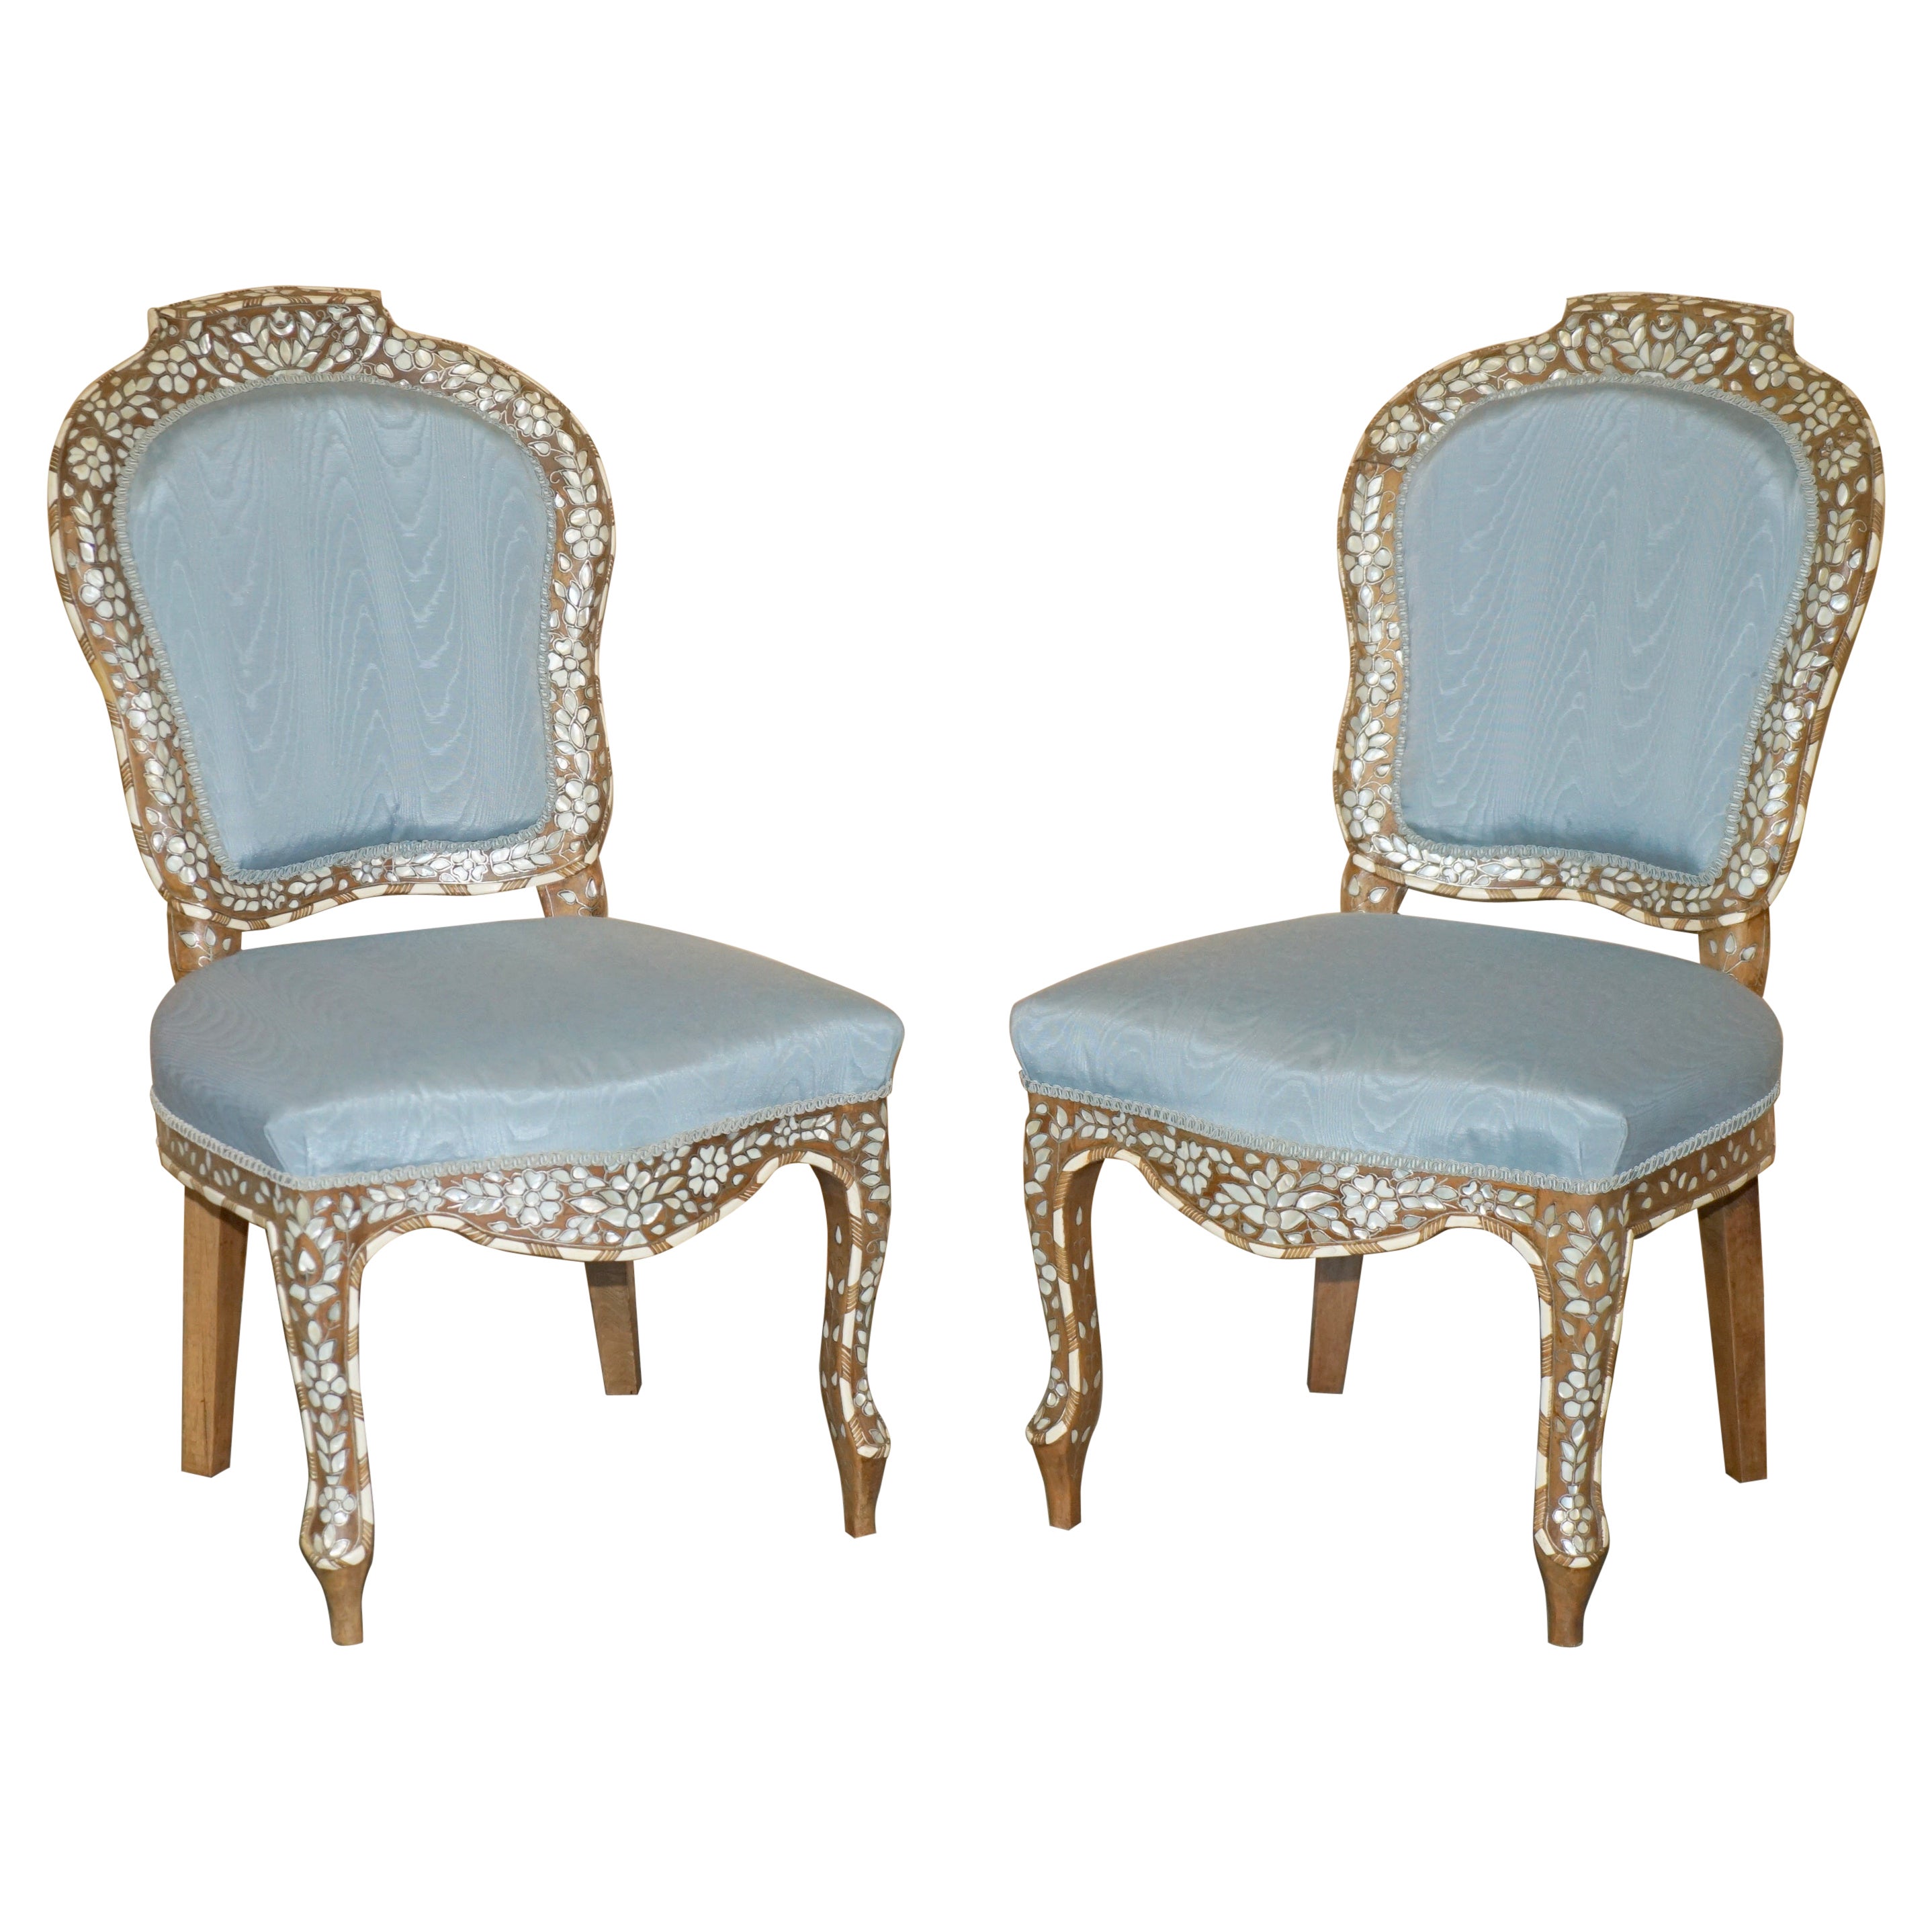 SUBLIMES Pärchen ANTIQUE MOTHER OF PEARL INLAID SIDE CHAIRS WITH HARDWOOD FRAMES